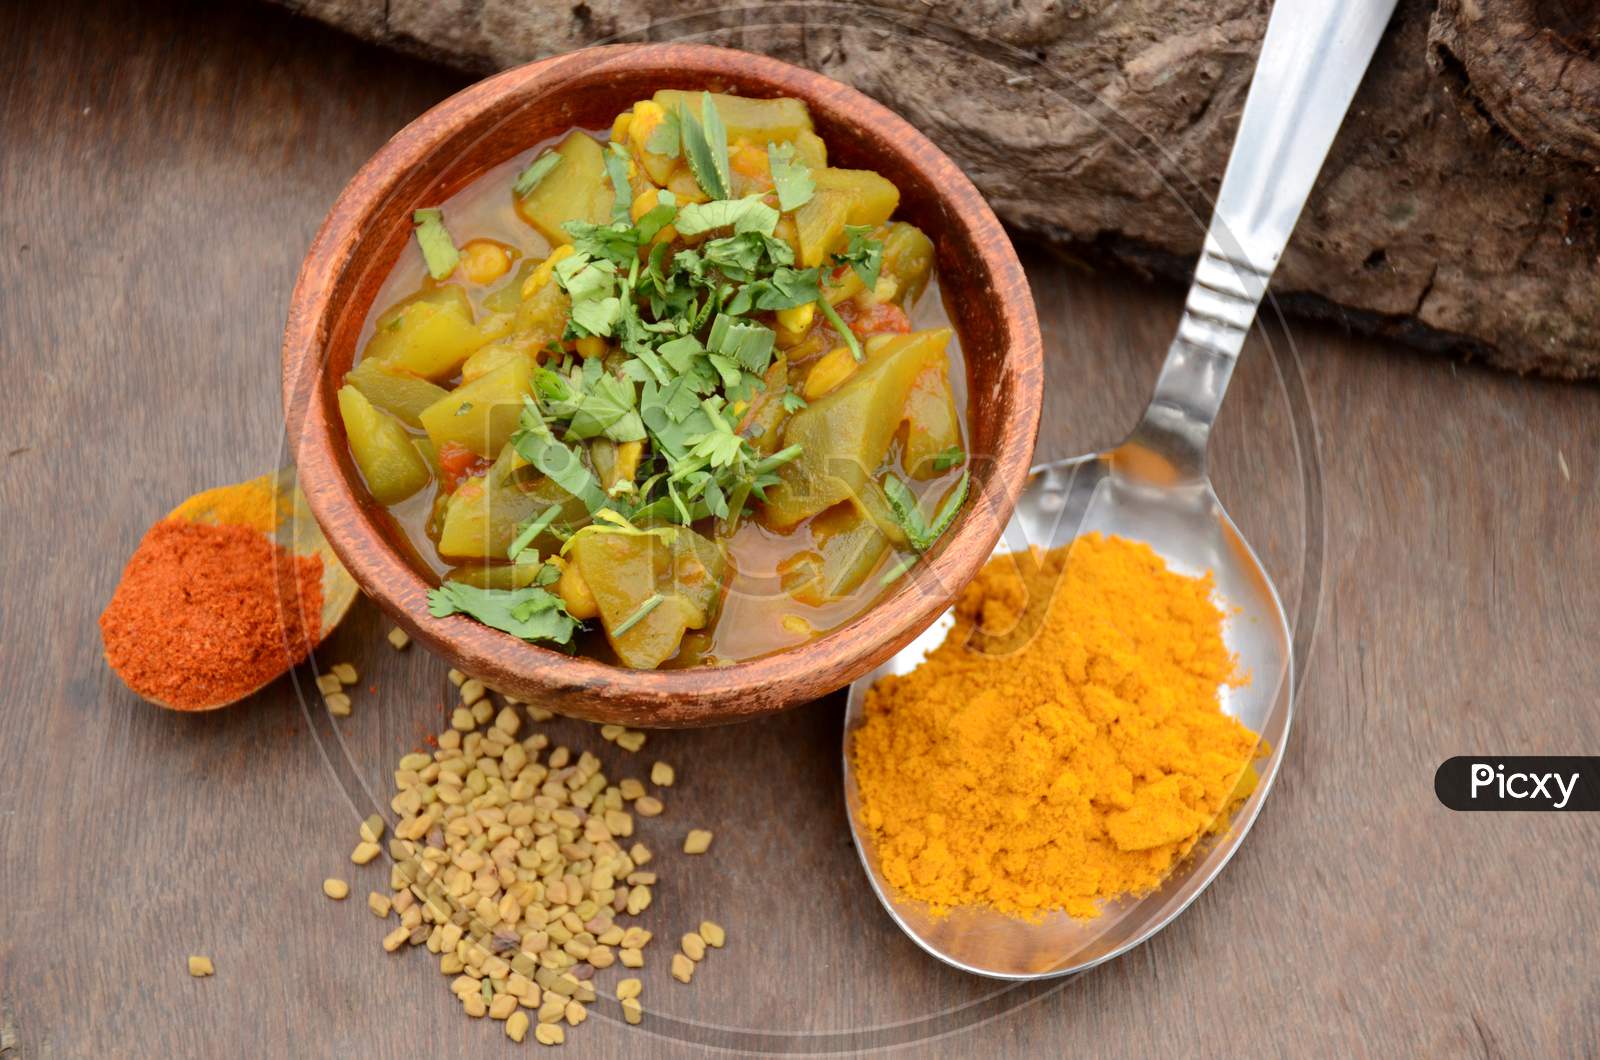 The Round Gourd Made Vegetable In The Wooden Bowl With Turmeric,Red Chilly Powder,And Greek, On The Brown Wooden Background.